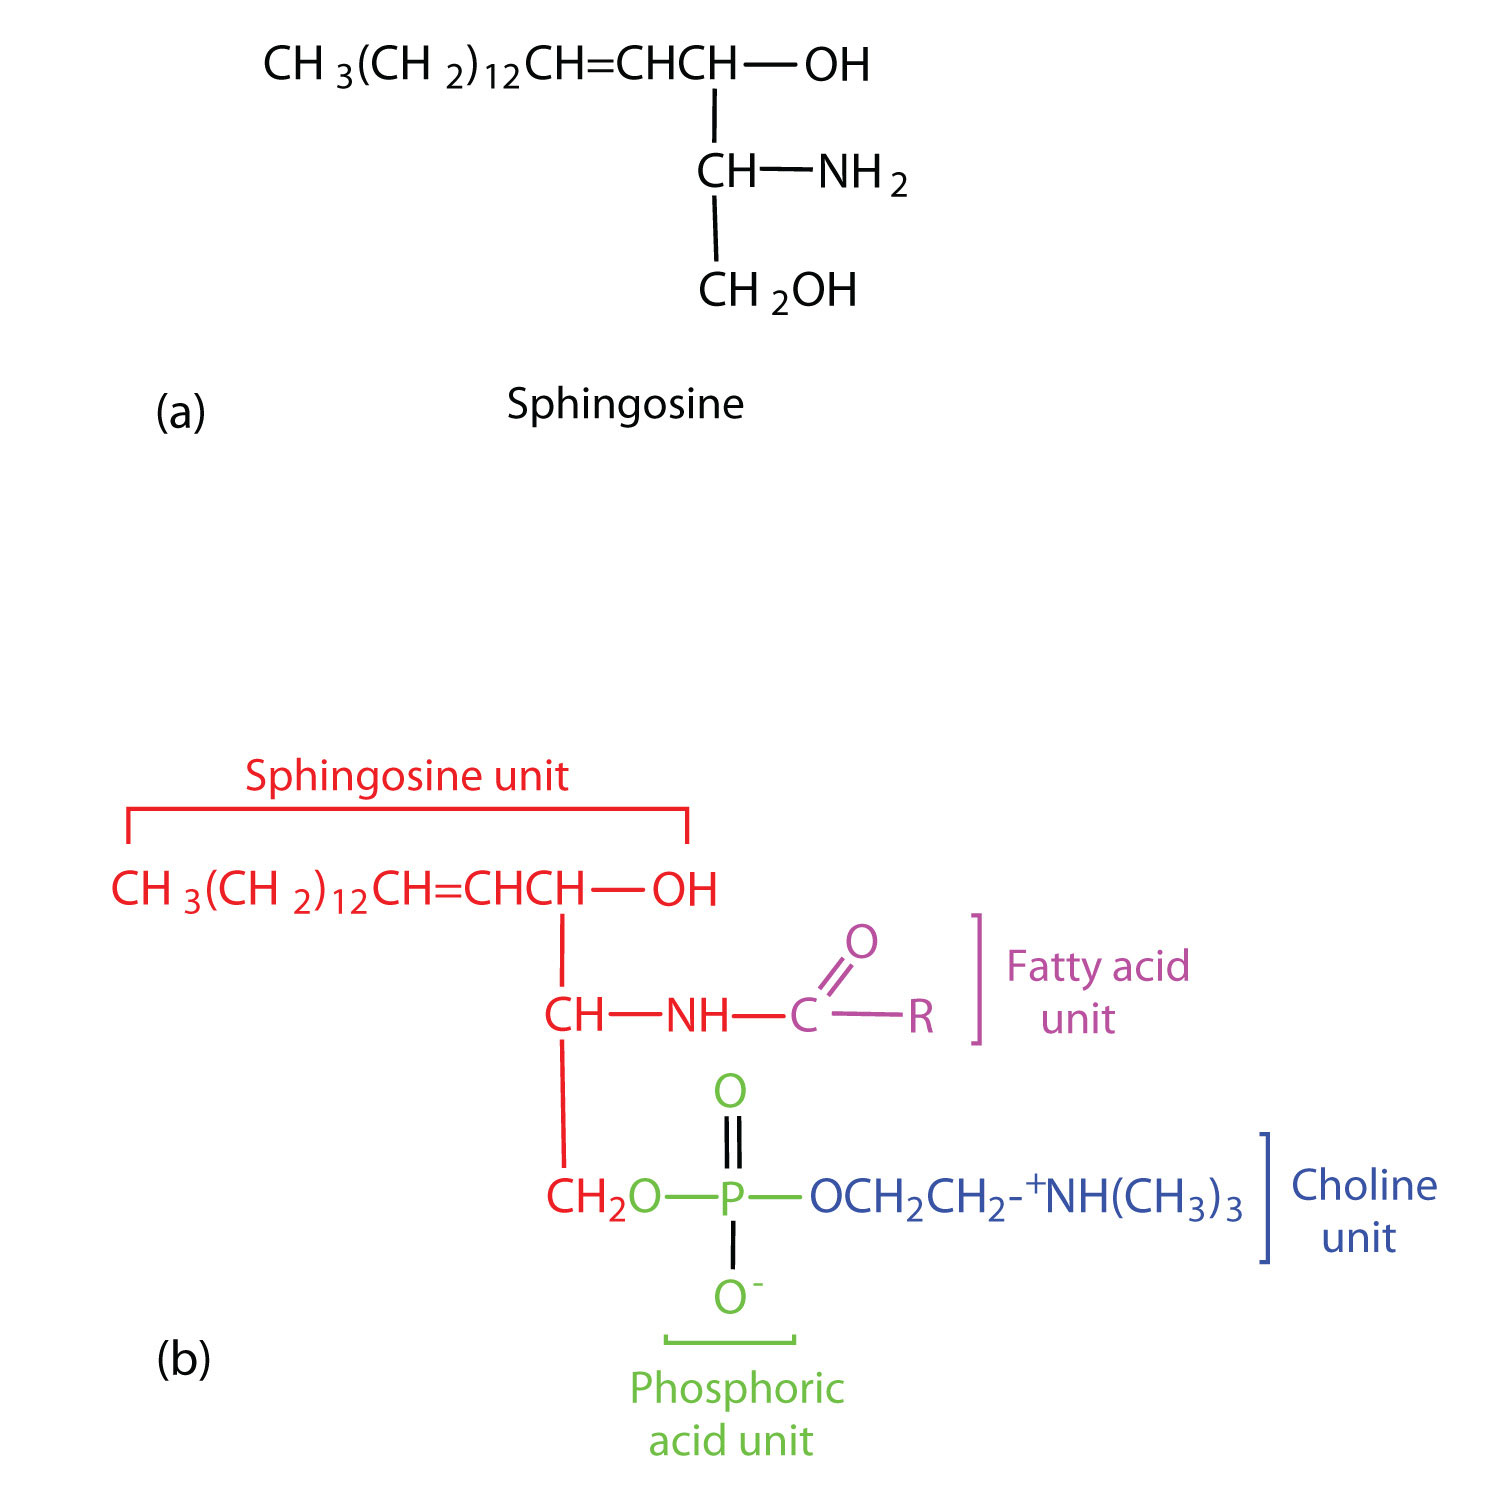 Two structure are shown: the top (a) is the structural formula of a sphingosine unit; the bottom (b) the structural formula of a sphingolipid broken up into its components: a sphingosine unit, a fatty acid unit and a chorline unit.